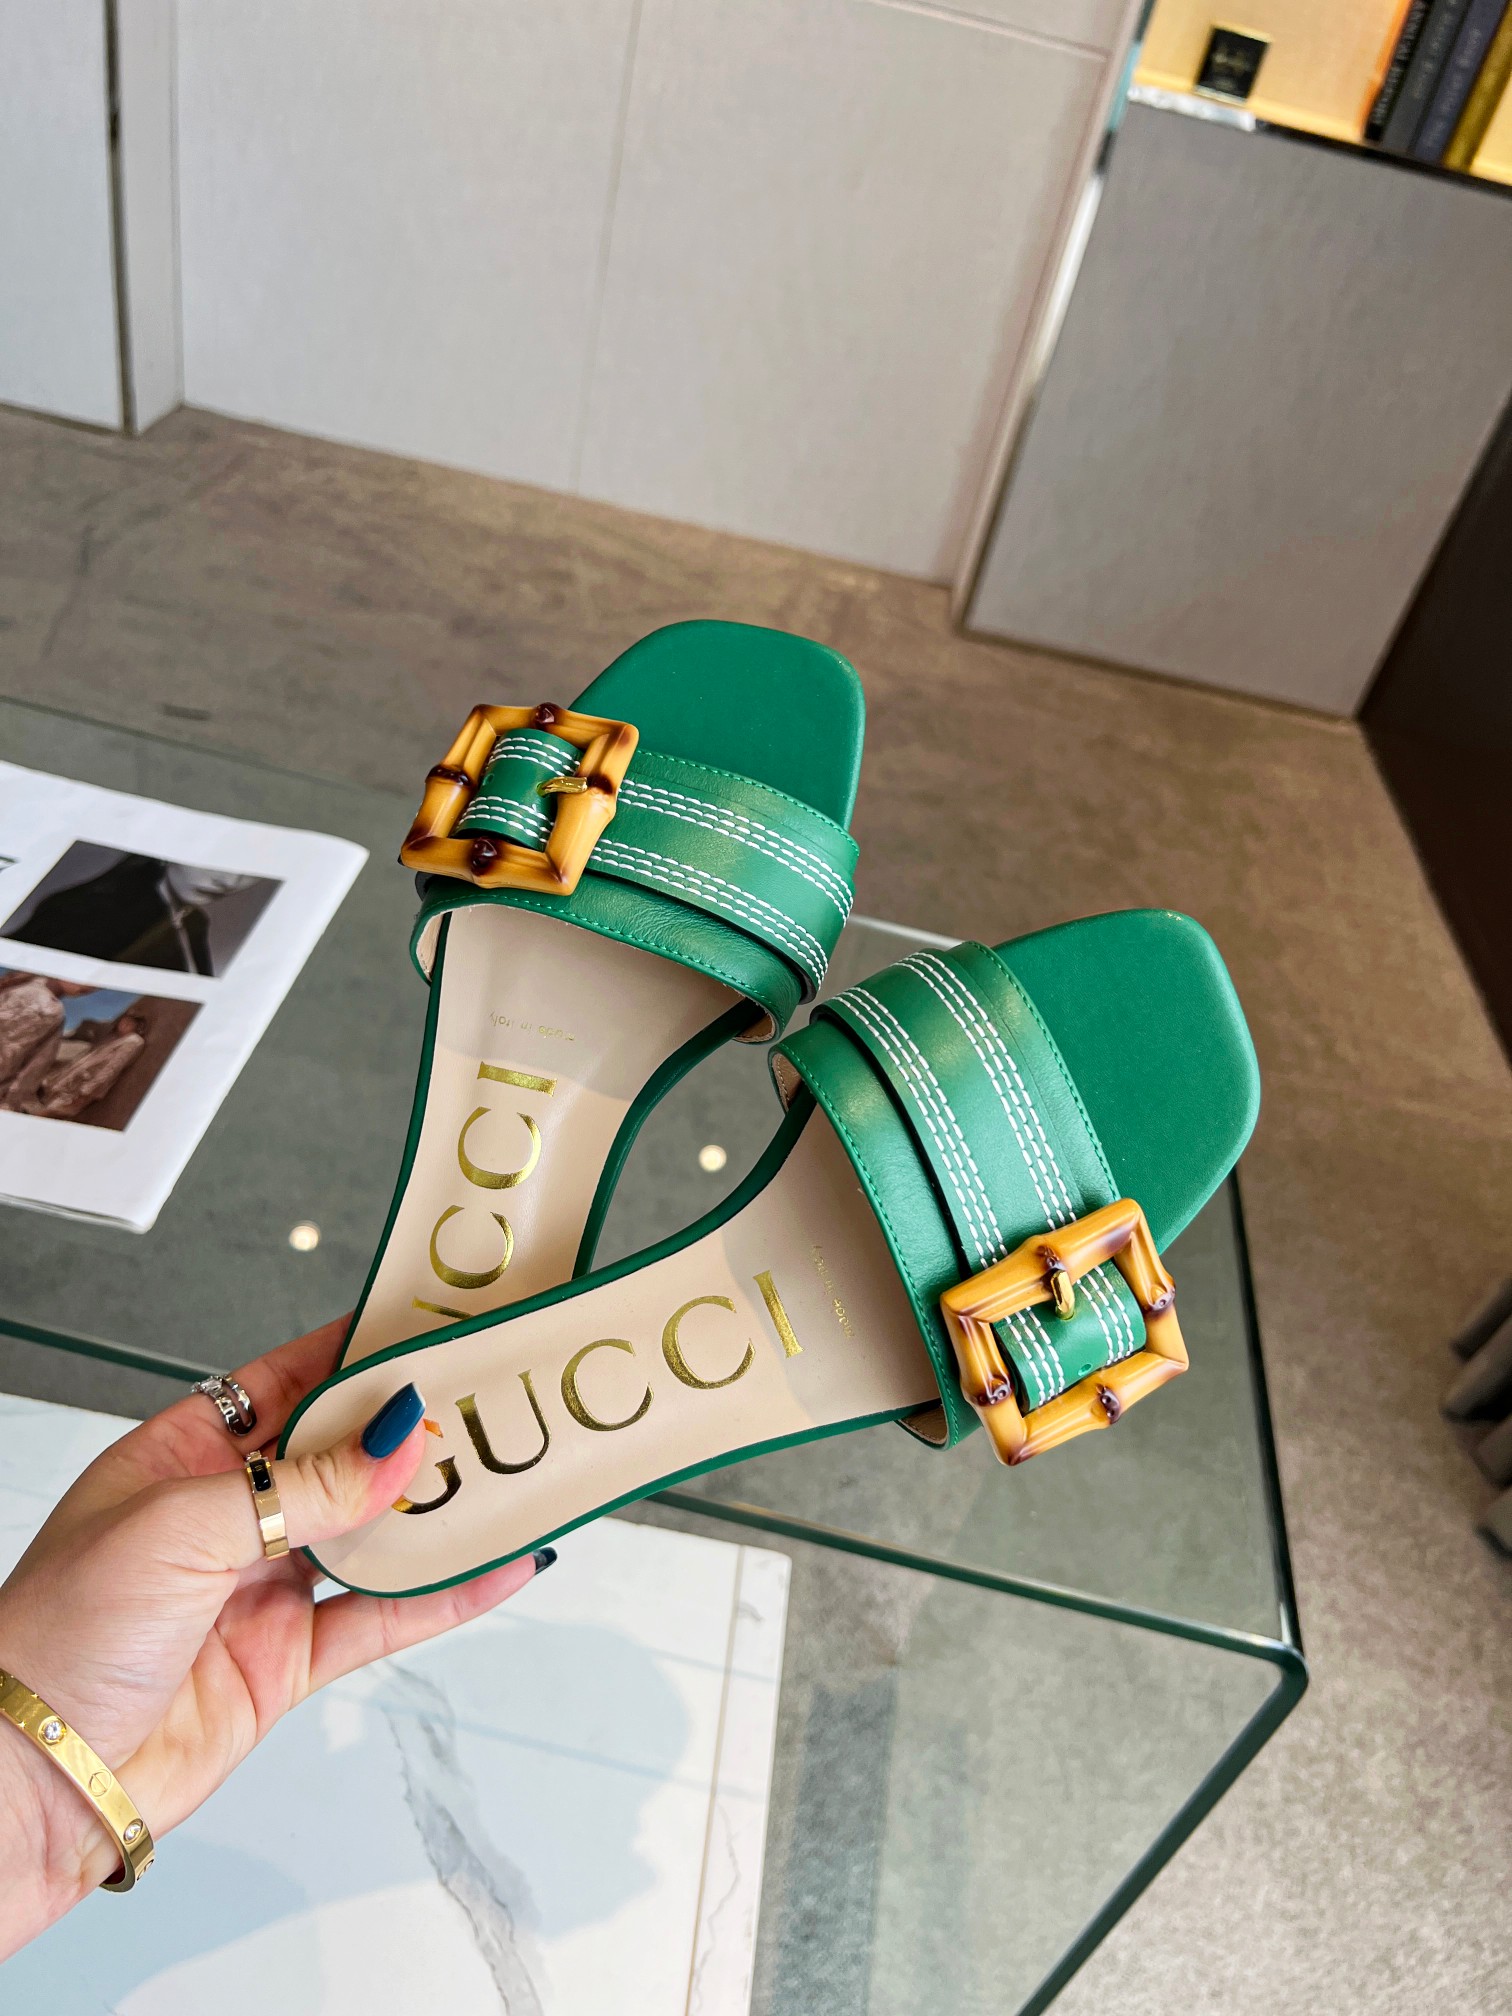 Gucci Slippers For Women # 271258, cheap Gucci Slippers For Women, only $57!